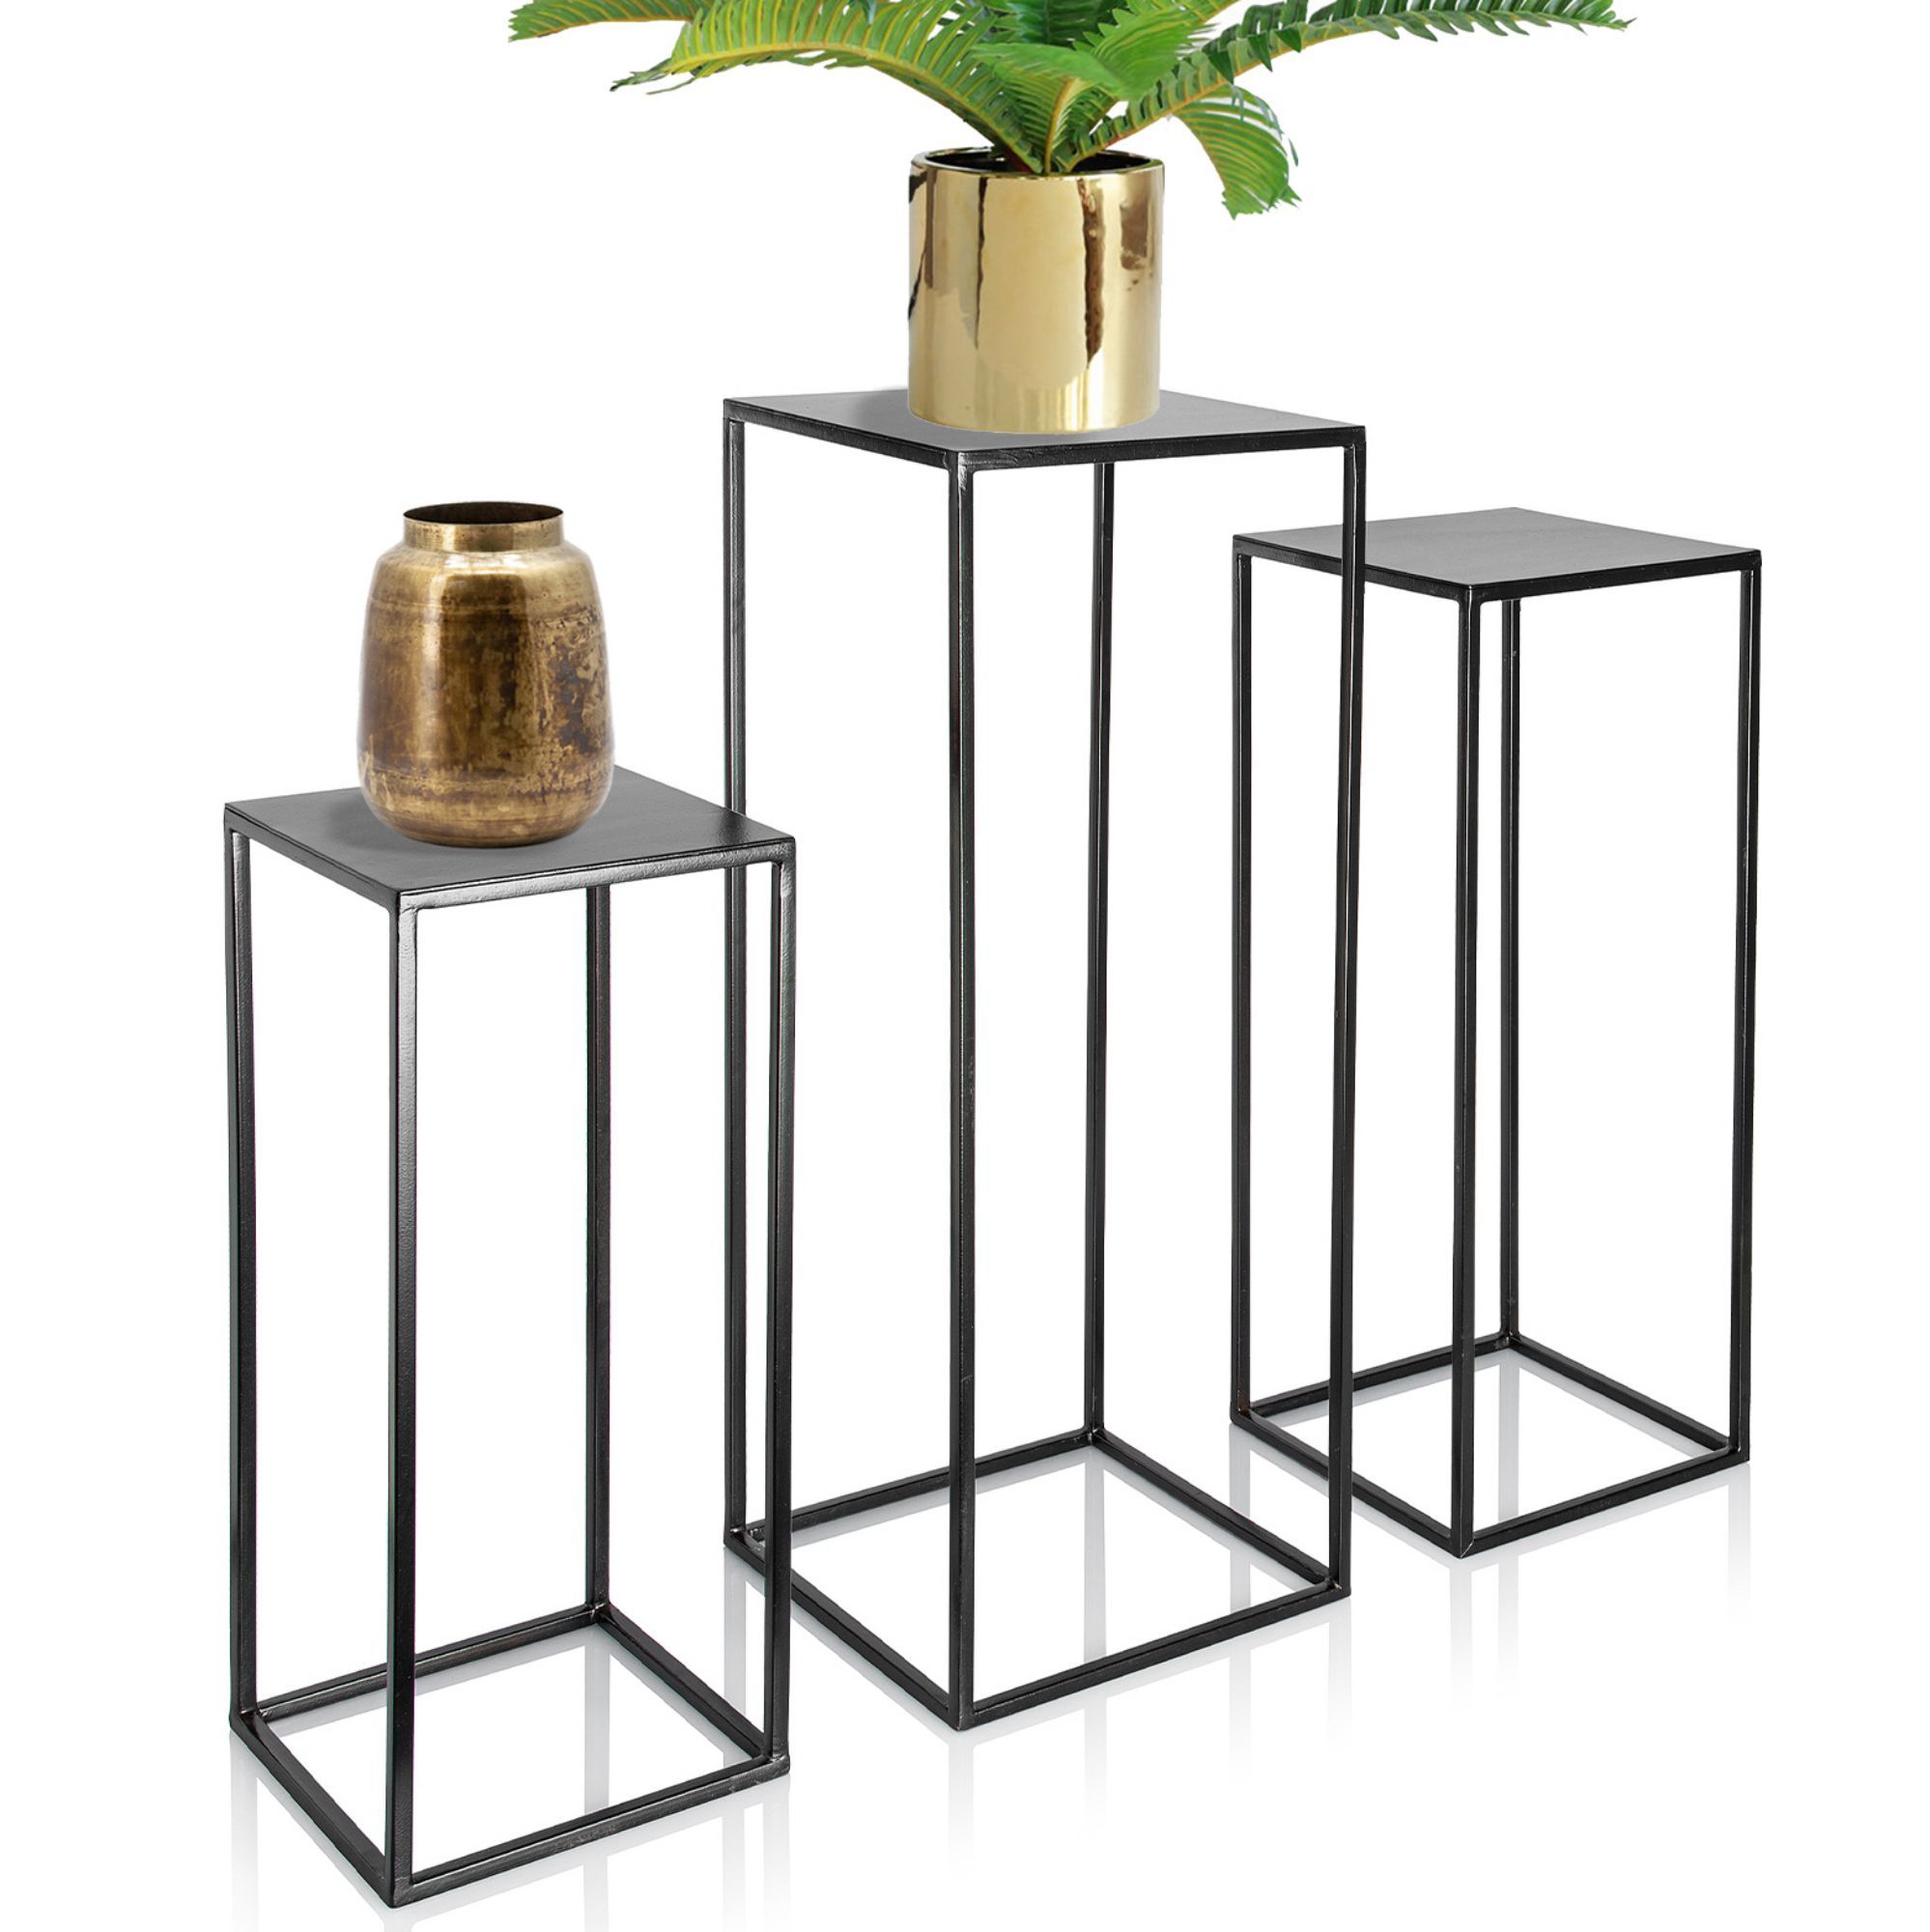 Trio Metal Plant Stand With High Square Rack Flower Holder | Kimisty Within Metal Plant Stands (View 15 of 15)